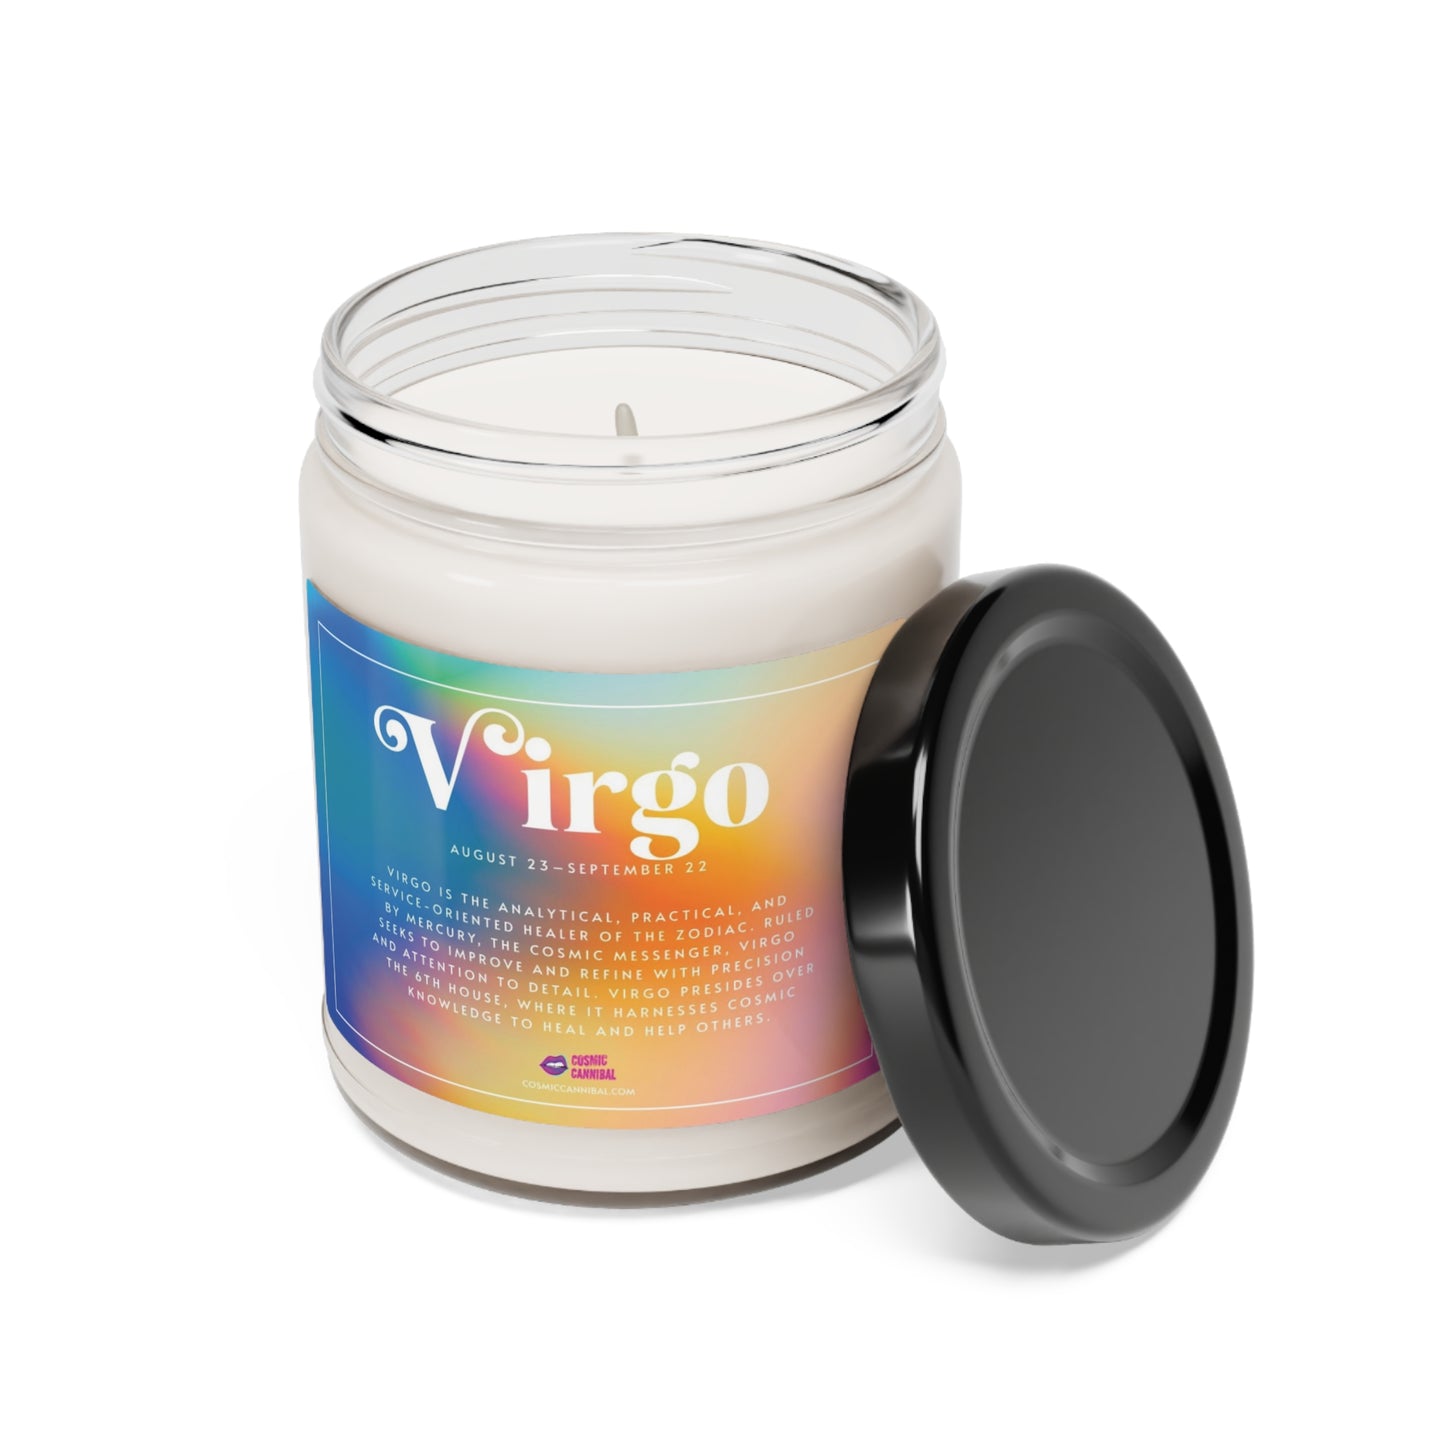 The Virgo Candle